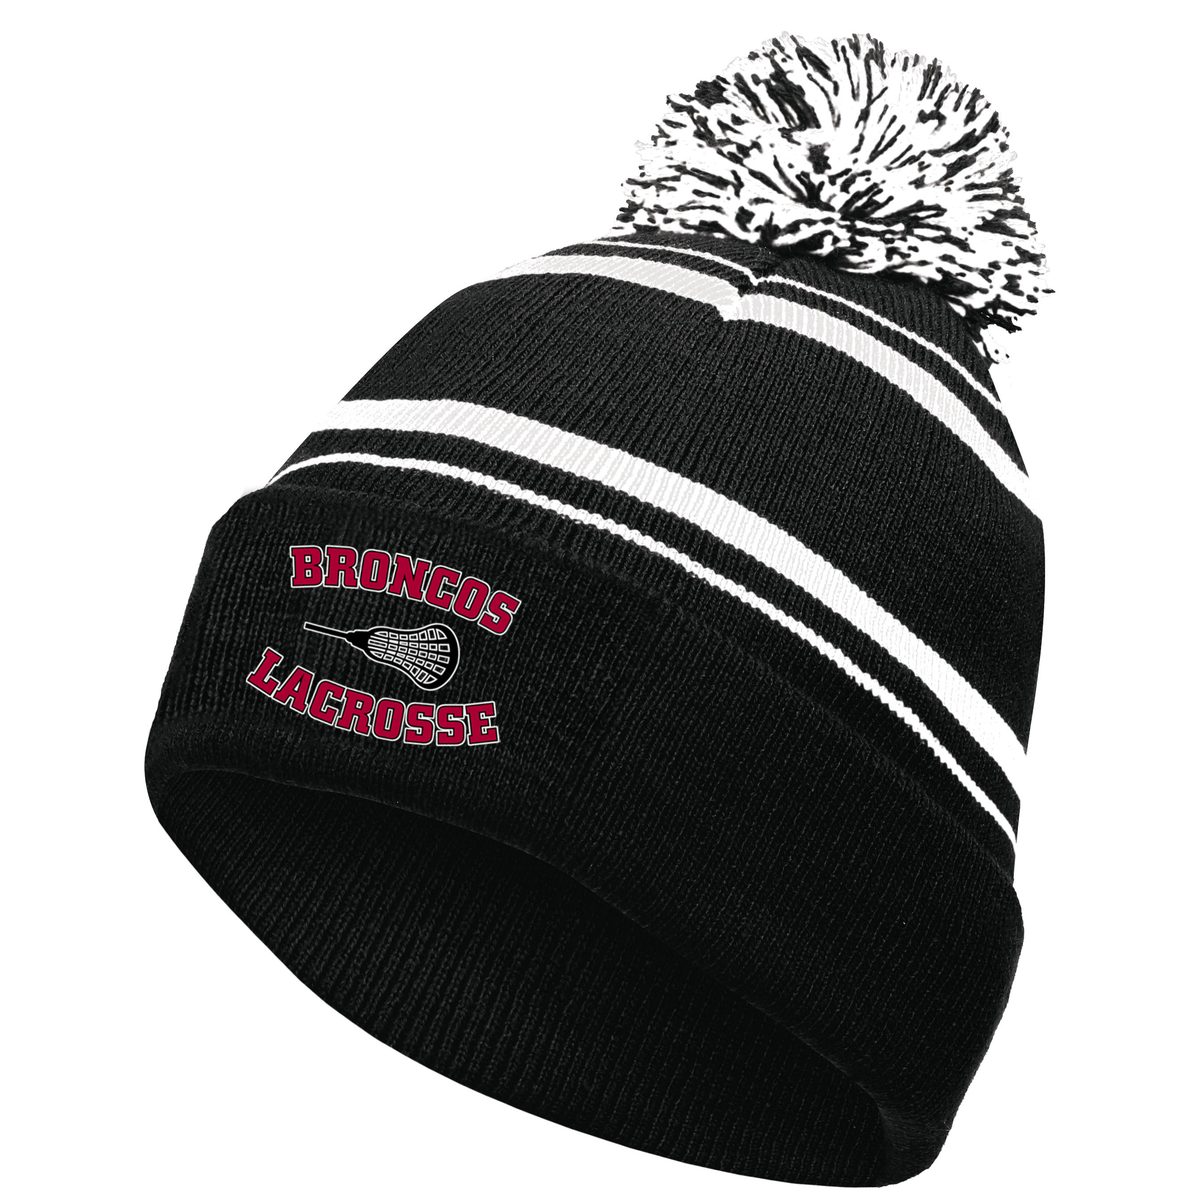 Bailey Middle School Lacrosse Homecoming Beanie